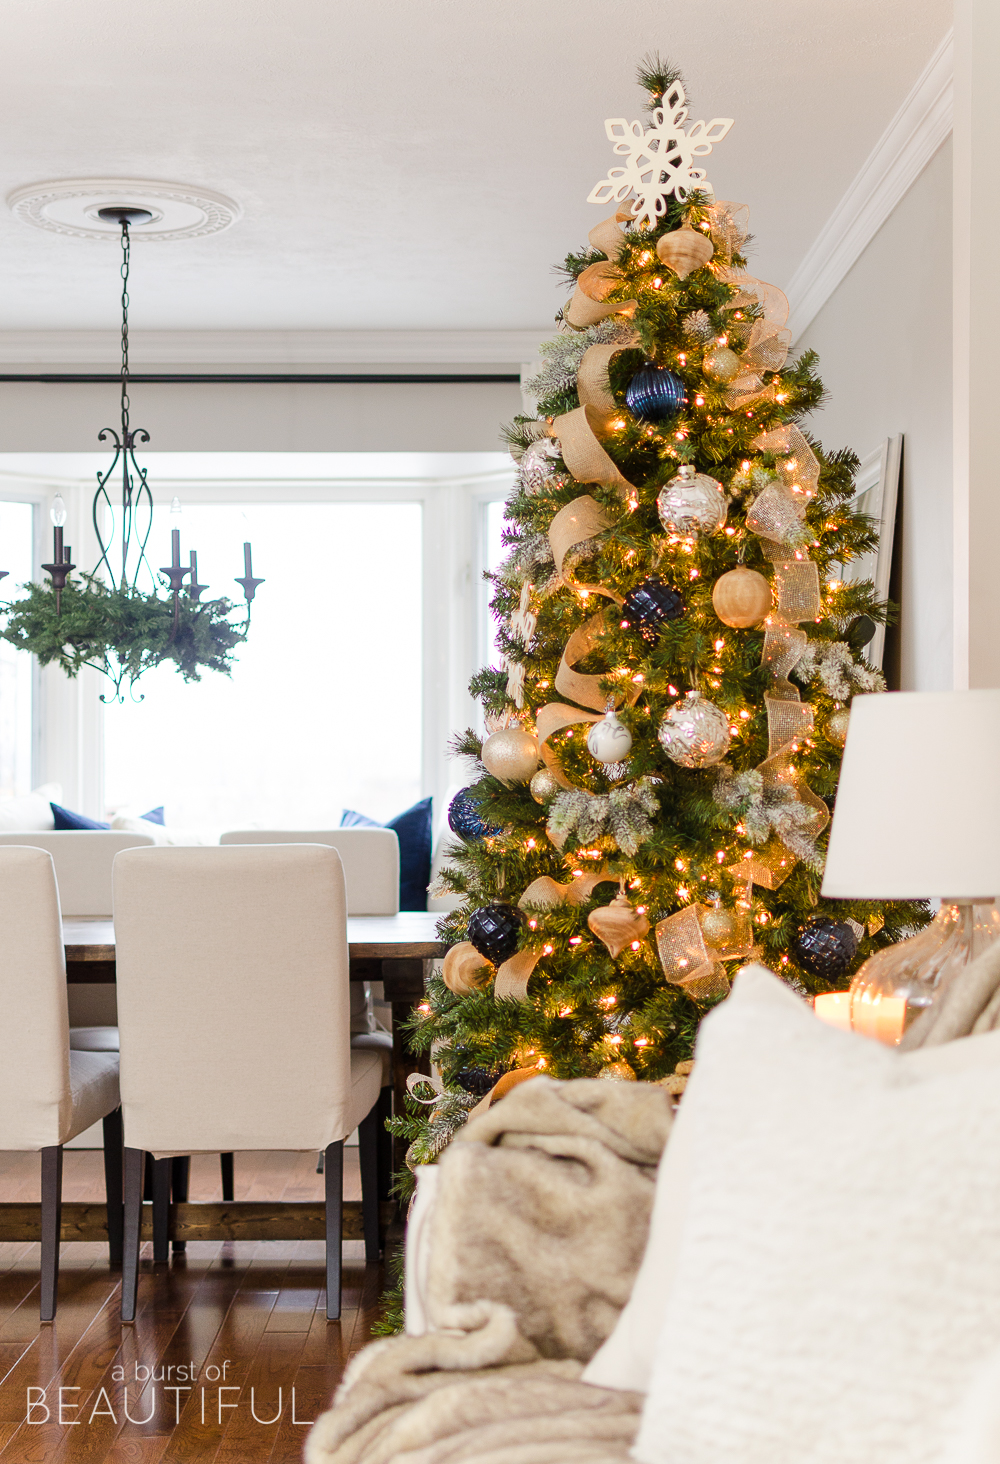 A navy and gold Christmas tree adds a touch of understated luxury to this modern farmhouse.